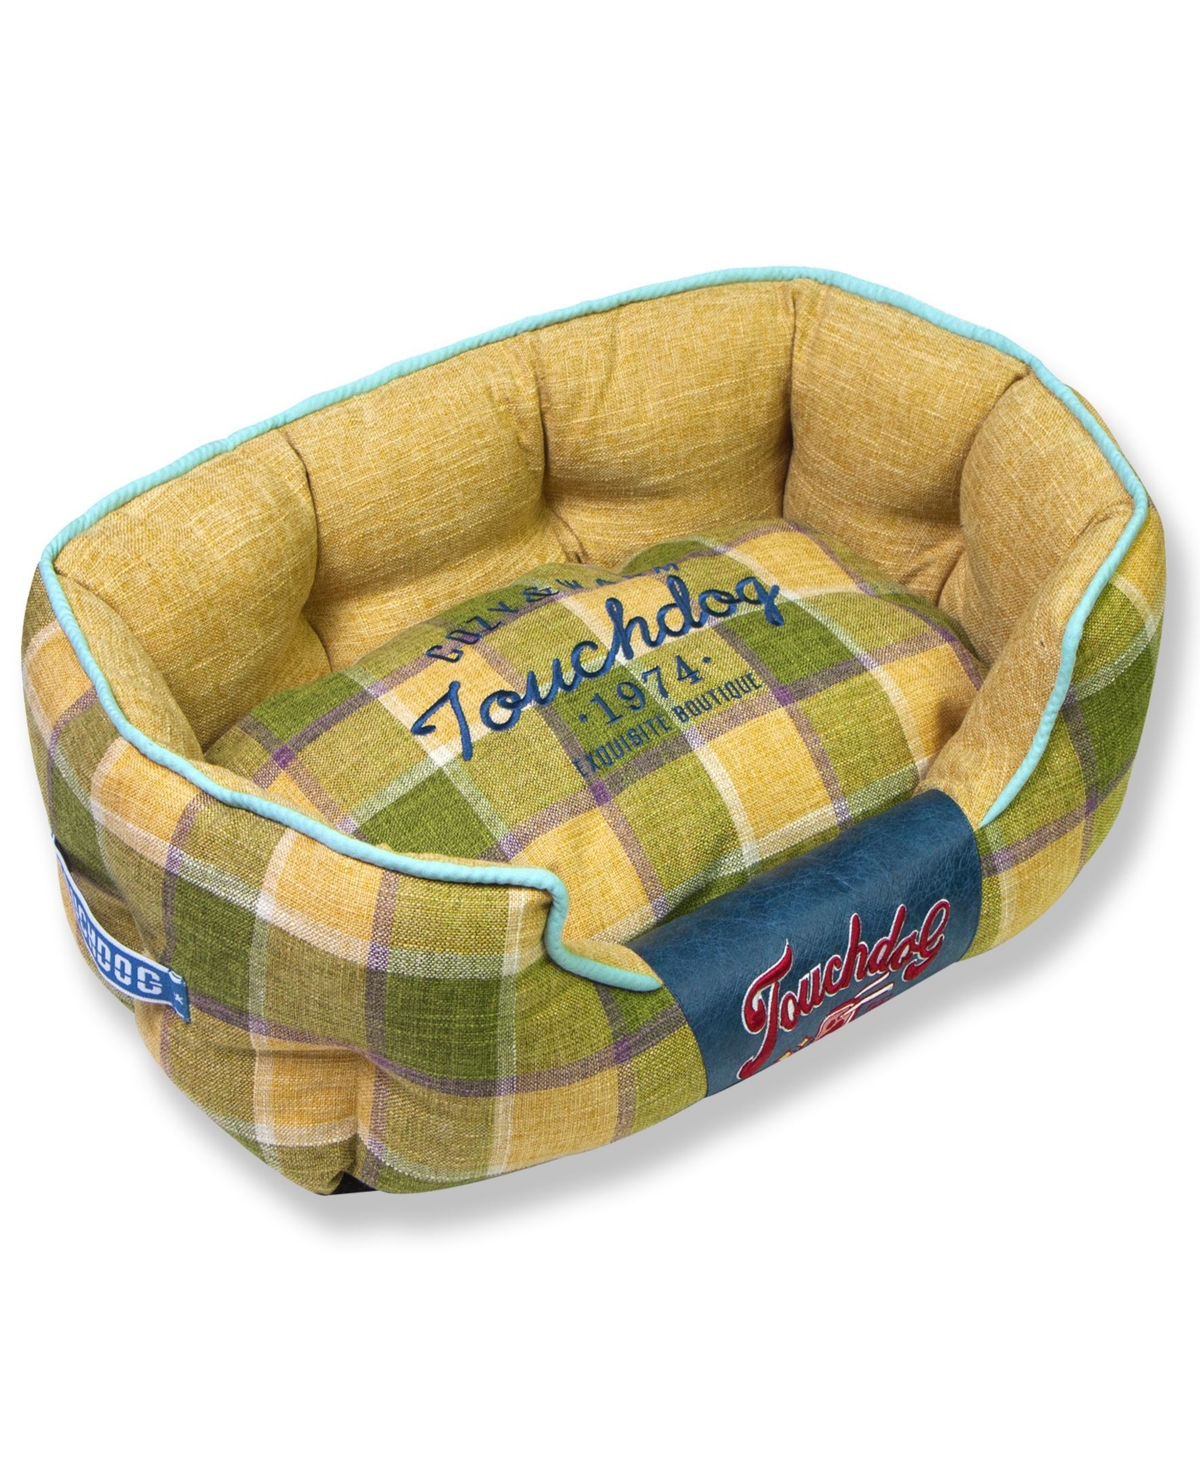 'Archi-Checked' Designer Plaid Oval Dog Bed Large - Yellow